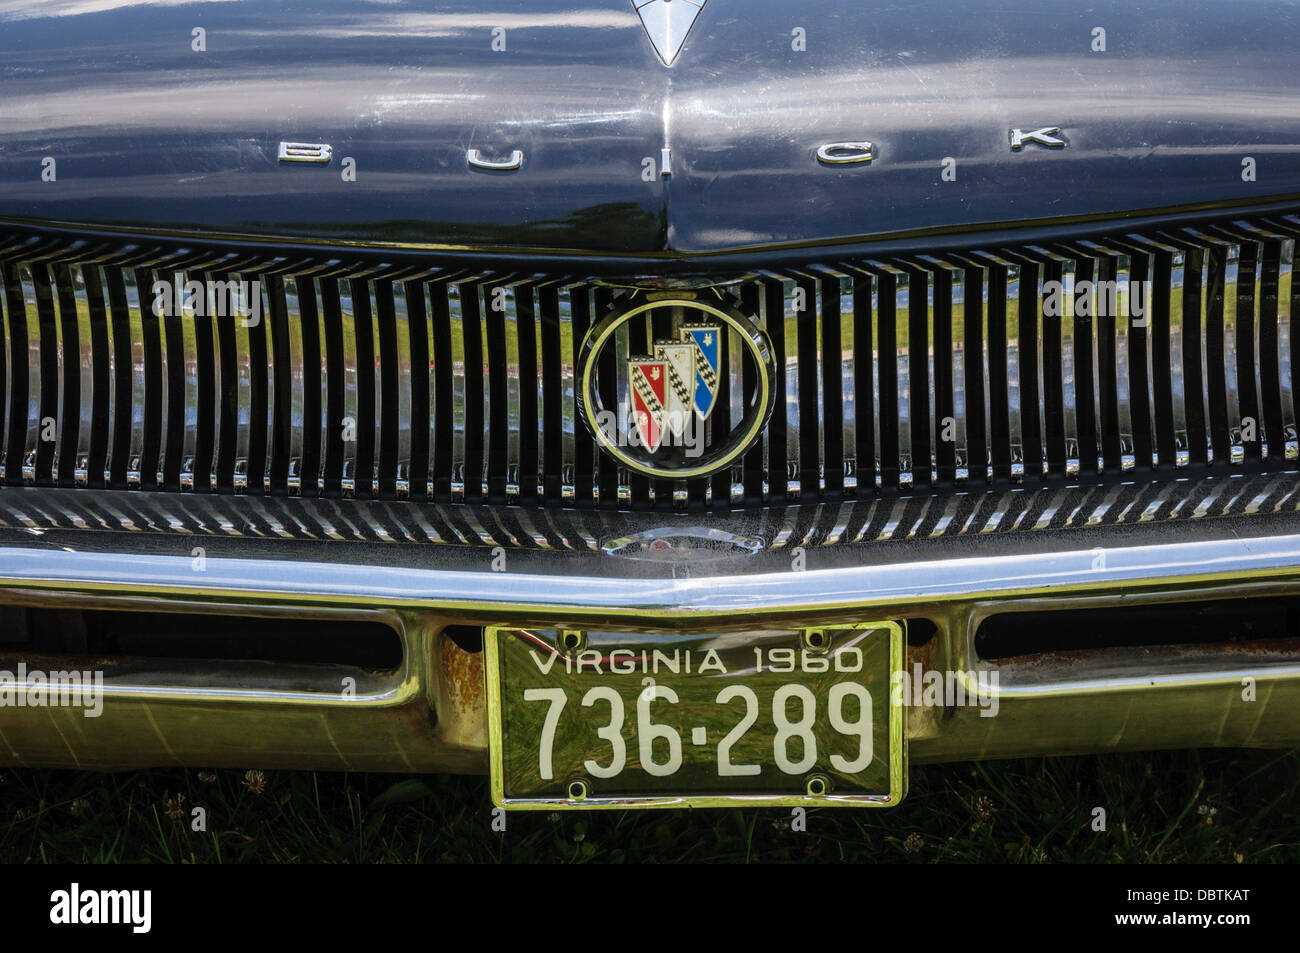 1960 Buick Invicta, Antique Car Show, Sully Historic Site, Chantilly, Virginia Stock Photo